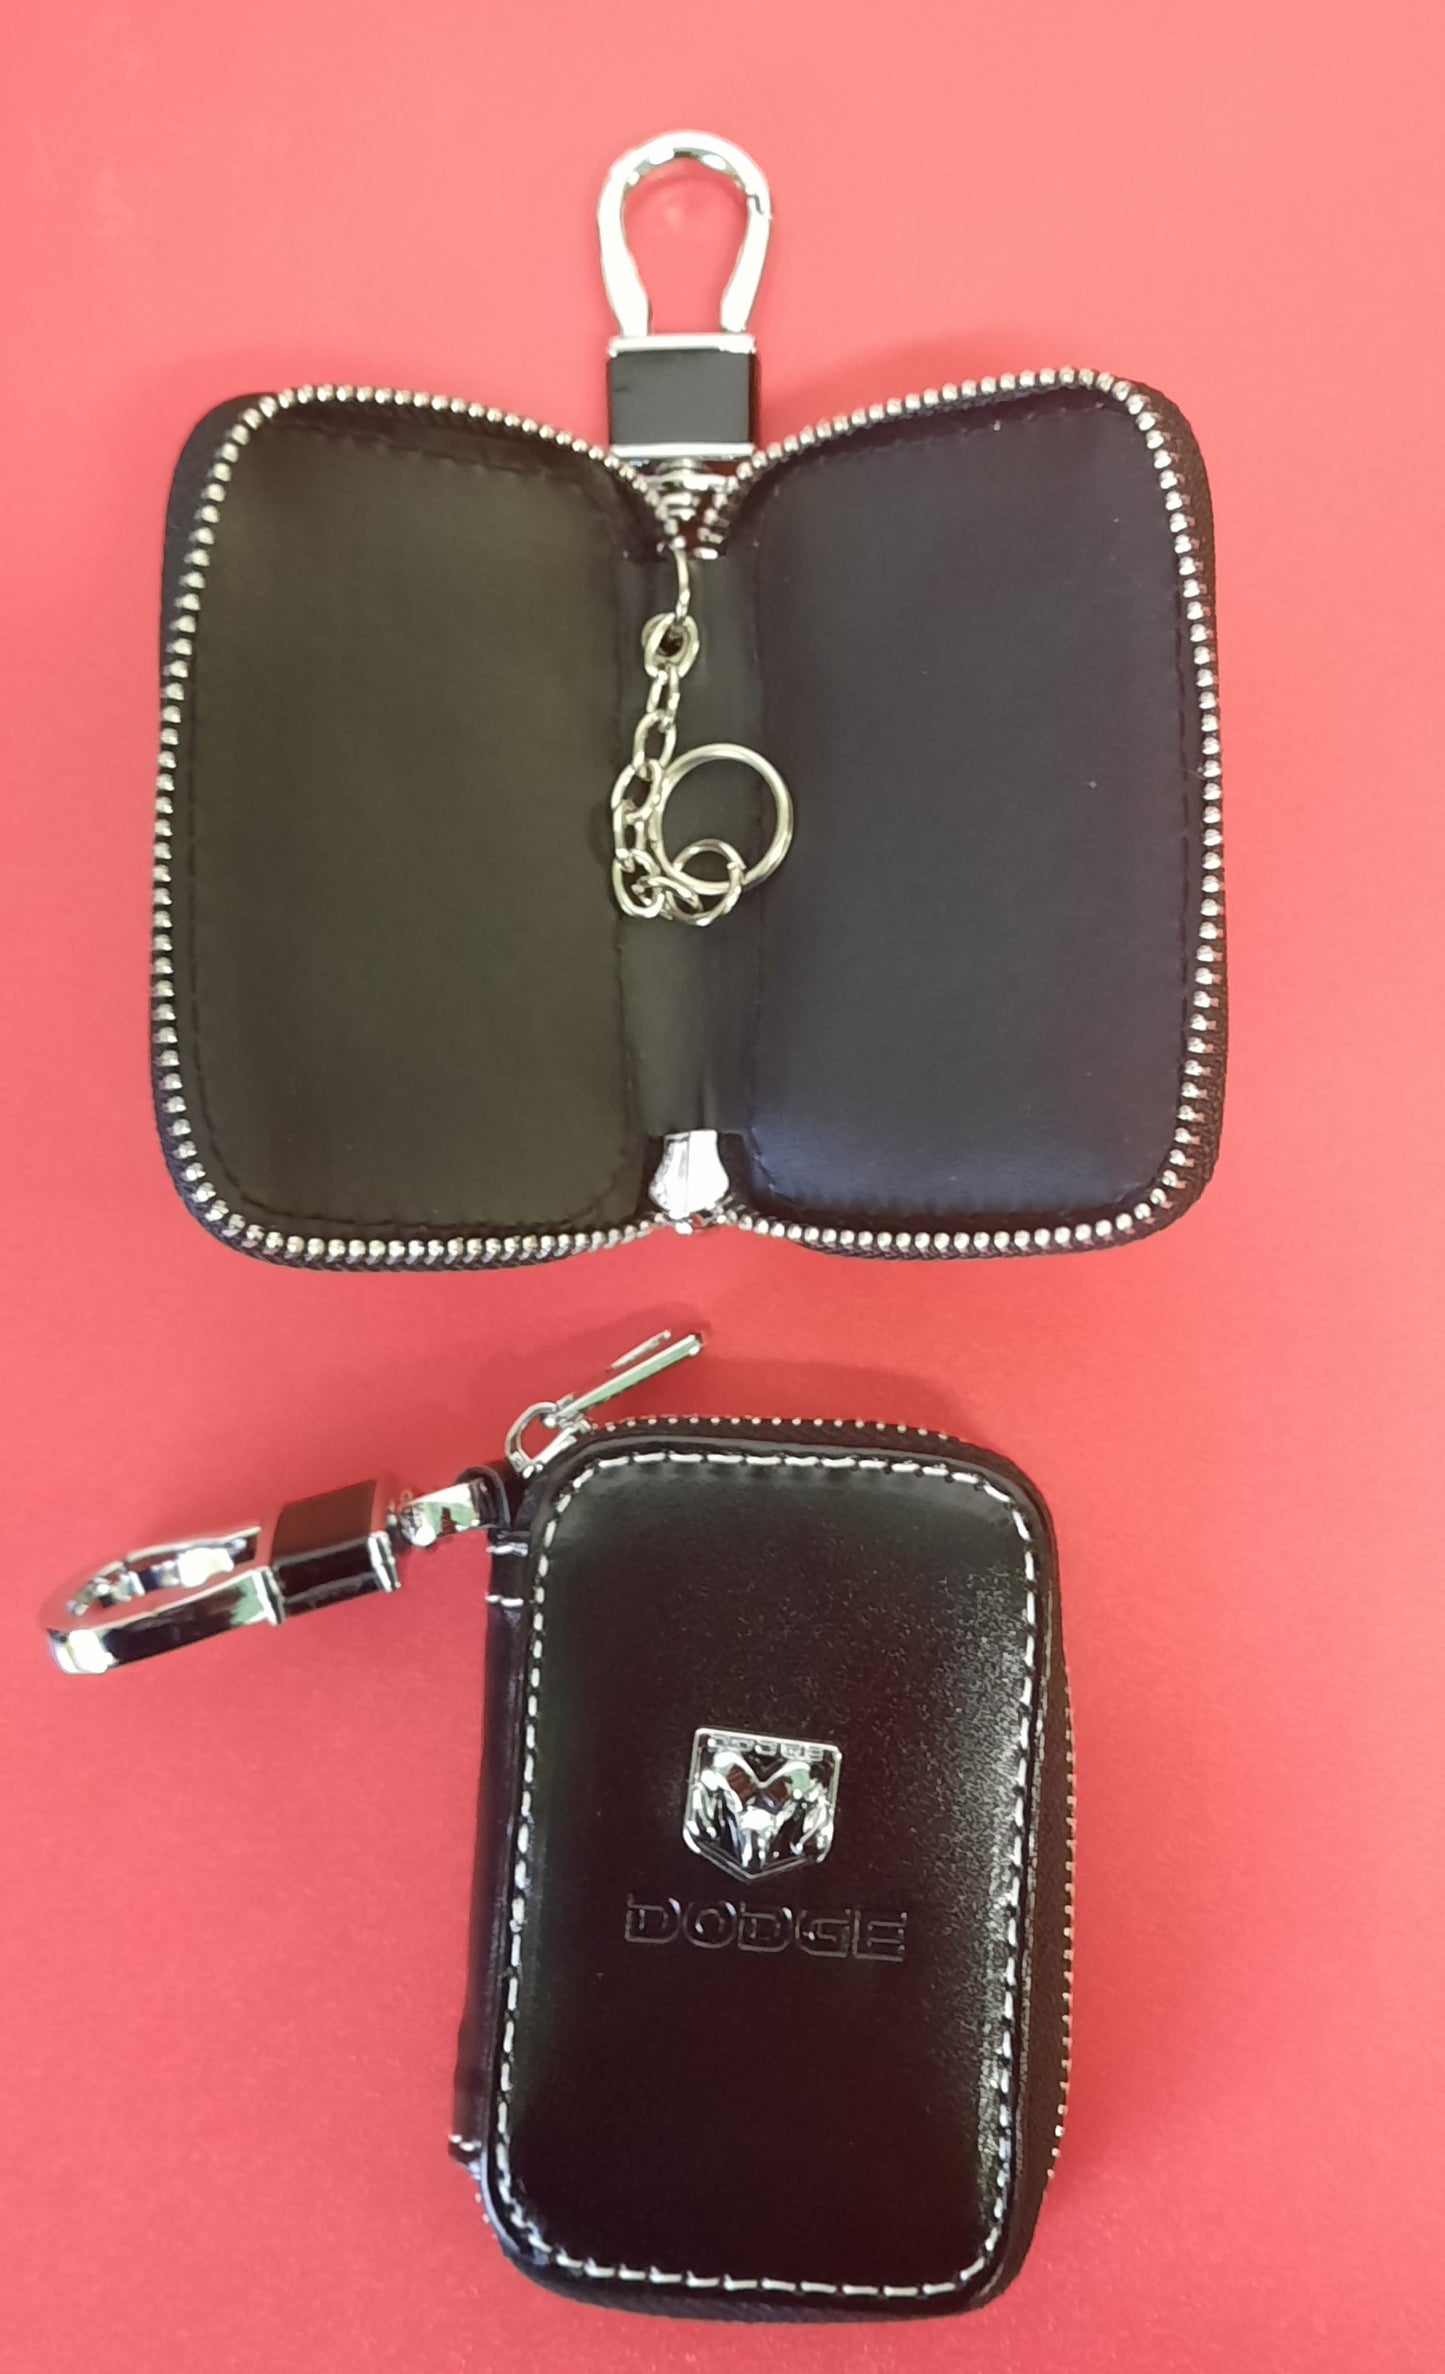 Dodge Pouch Key Ring